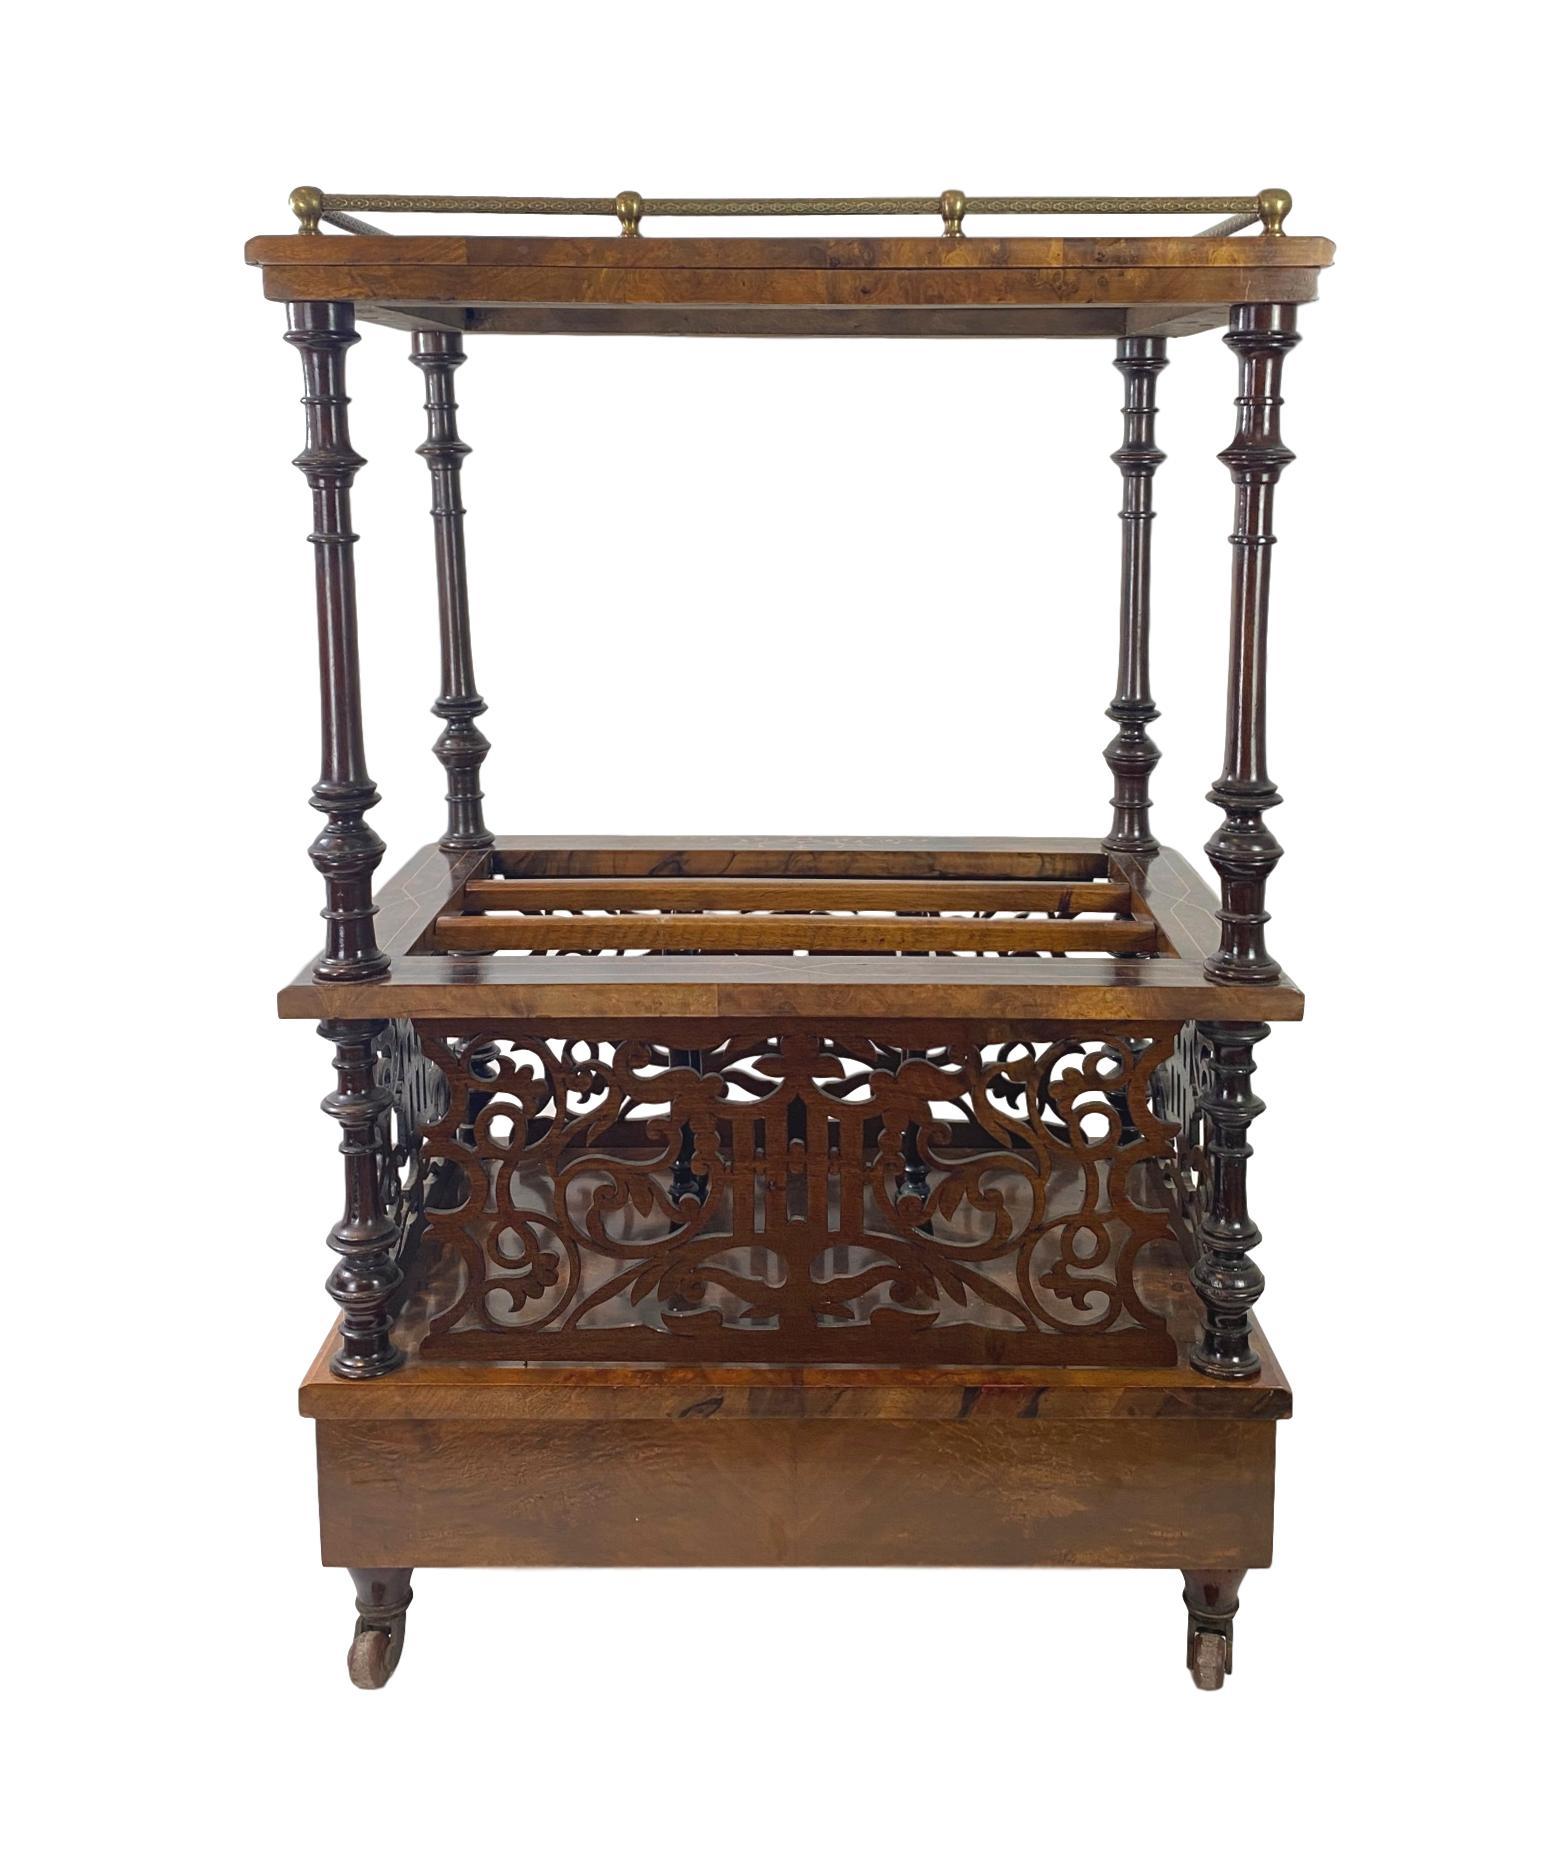 Hand-Crafted Burl Walnut Marquetry Inlaid Canterbury or Sheet Music Stand, English circa 1880